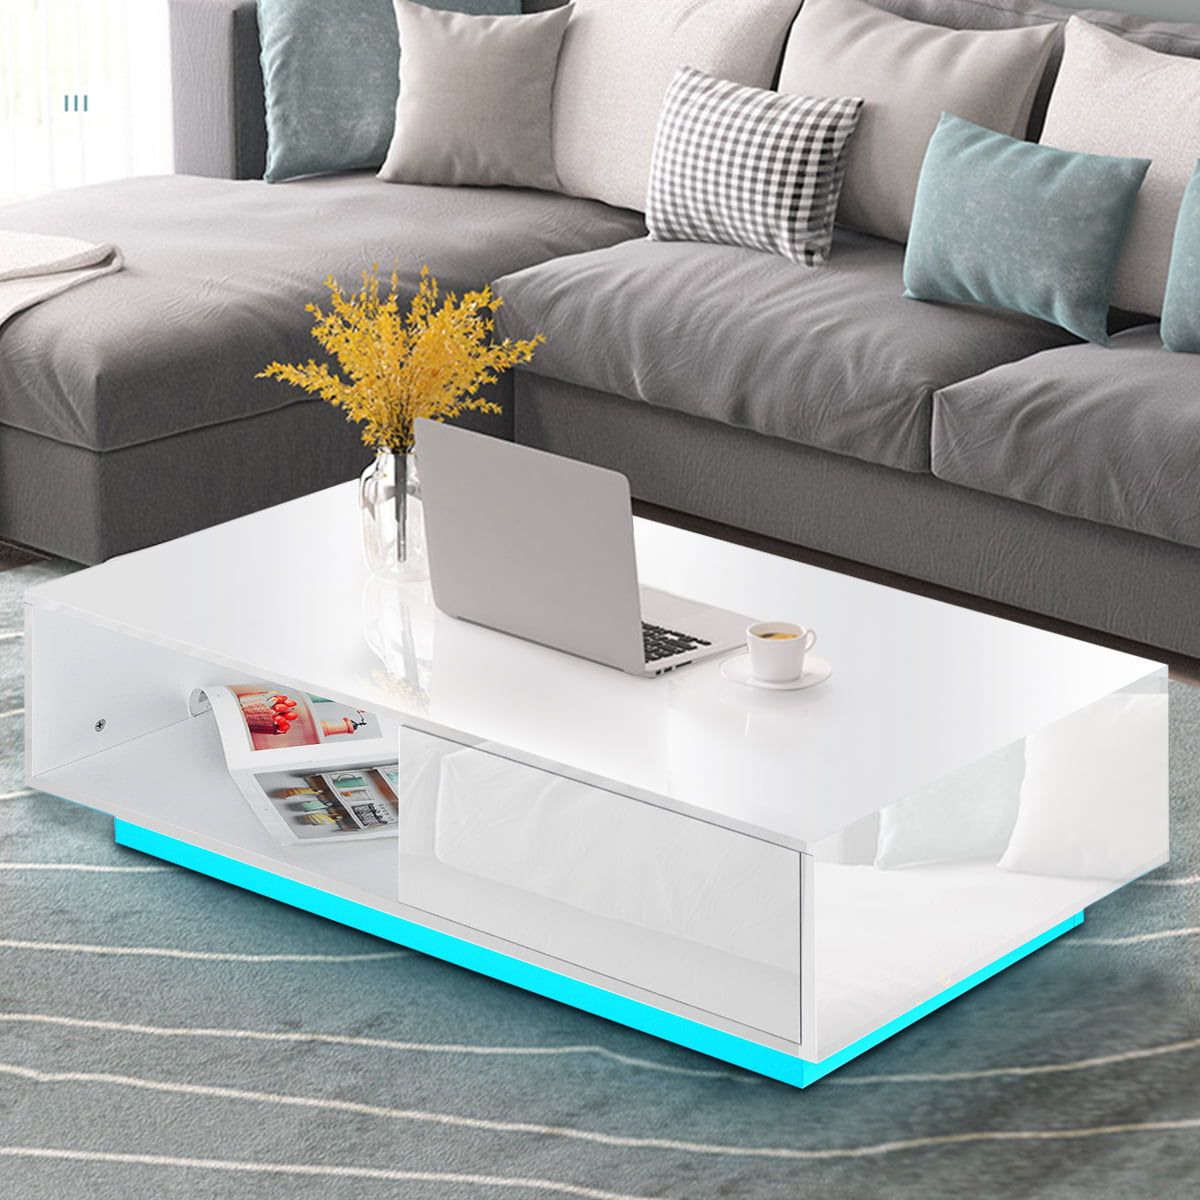 Rectangular Led Coffee Tables With Well Known High Gloss Rgb Led Coffee Table With 2 Drawer Storage Modern Sofa Side (View 10 of 15)